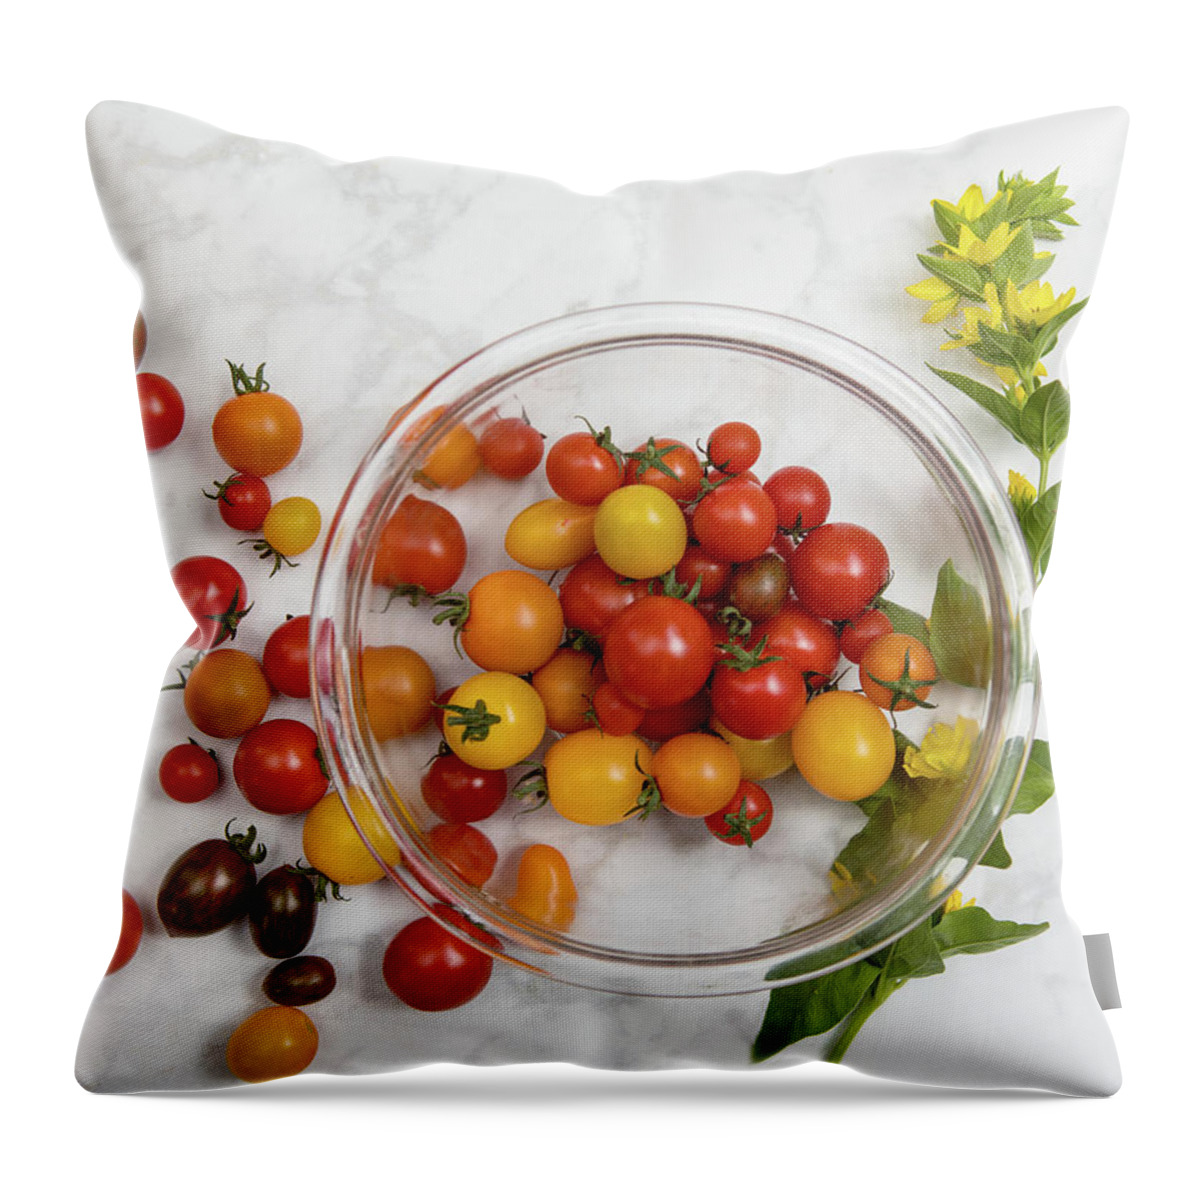 June2020 Throw Pillow featuring the photograph Cherry Tomatoes 3 by Rebecca Cozart